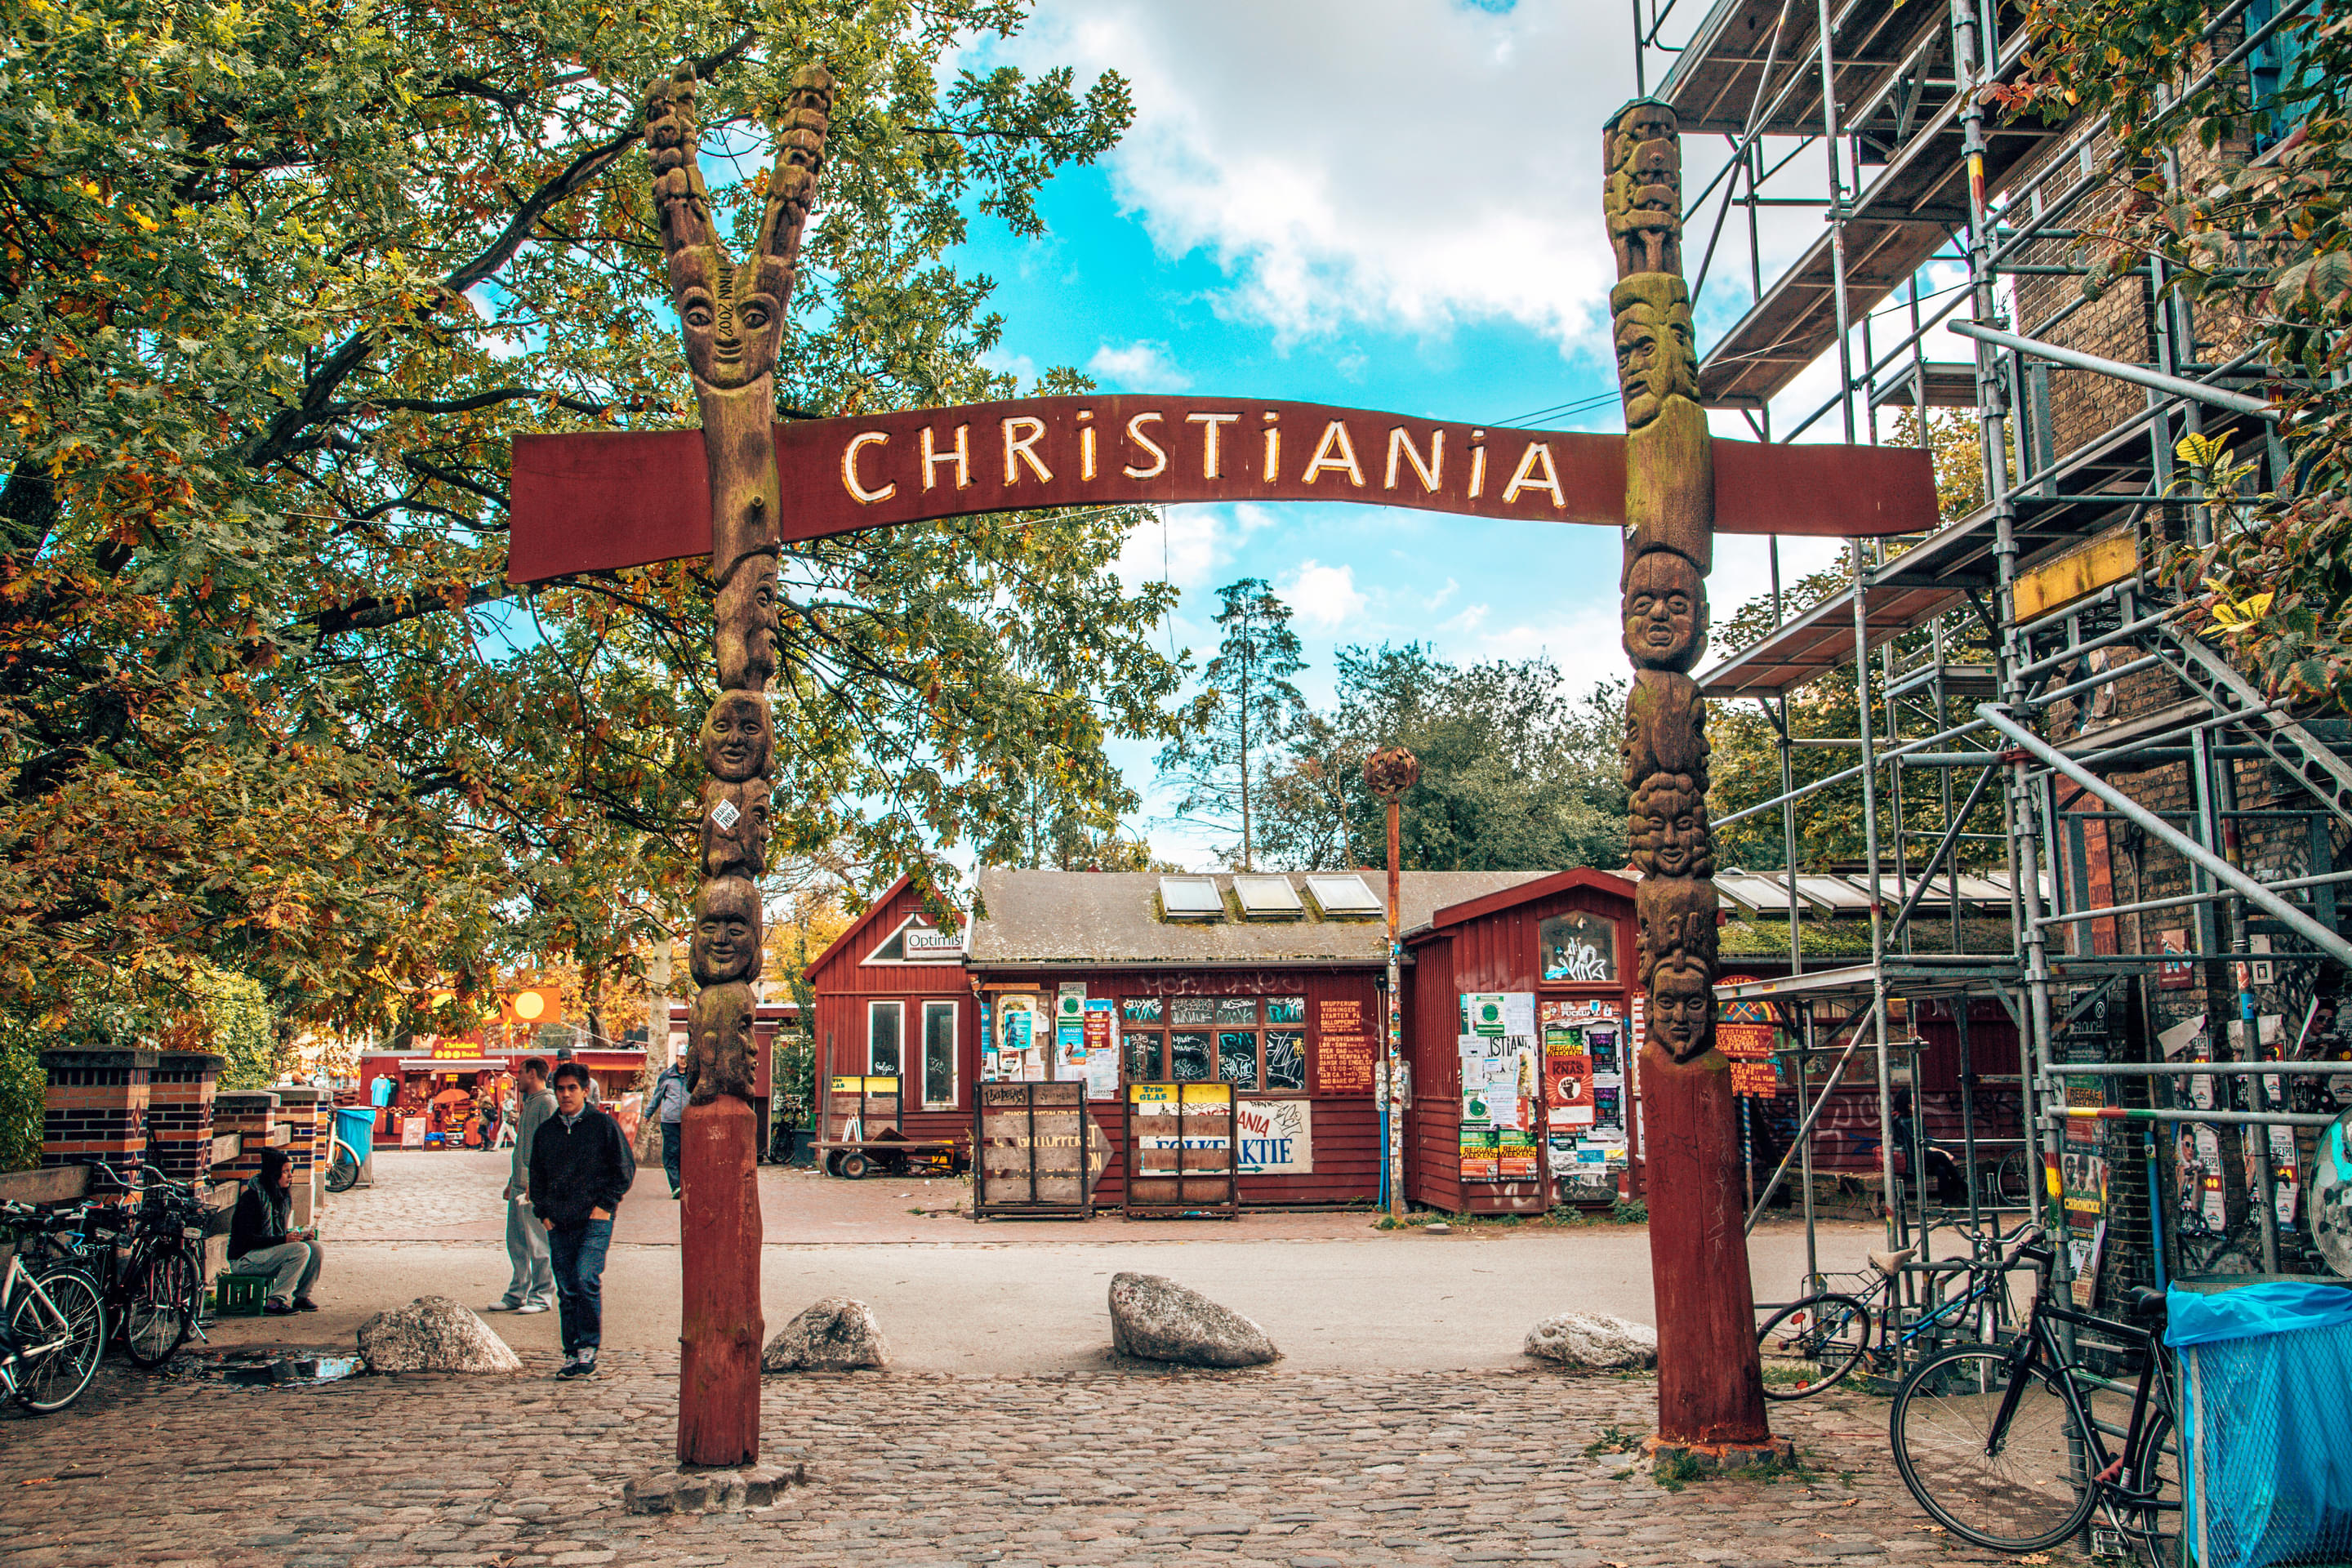 Christiania Overview